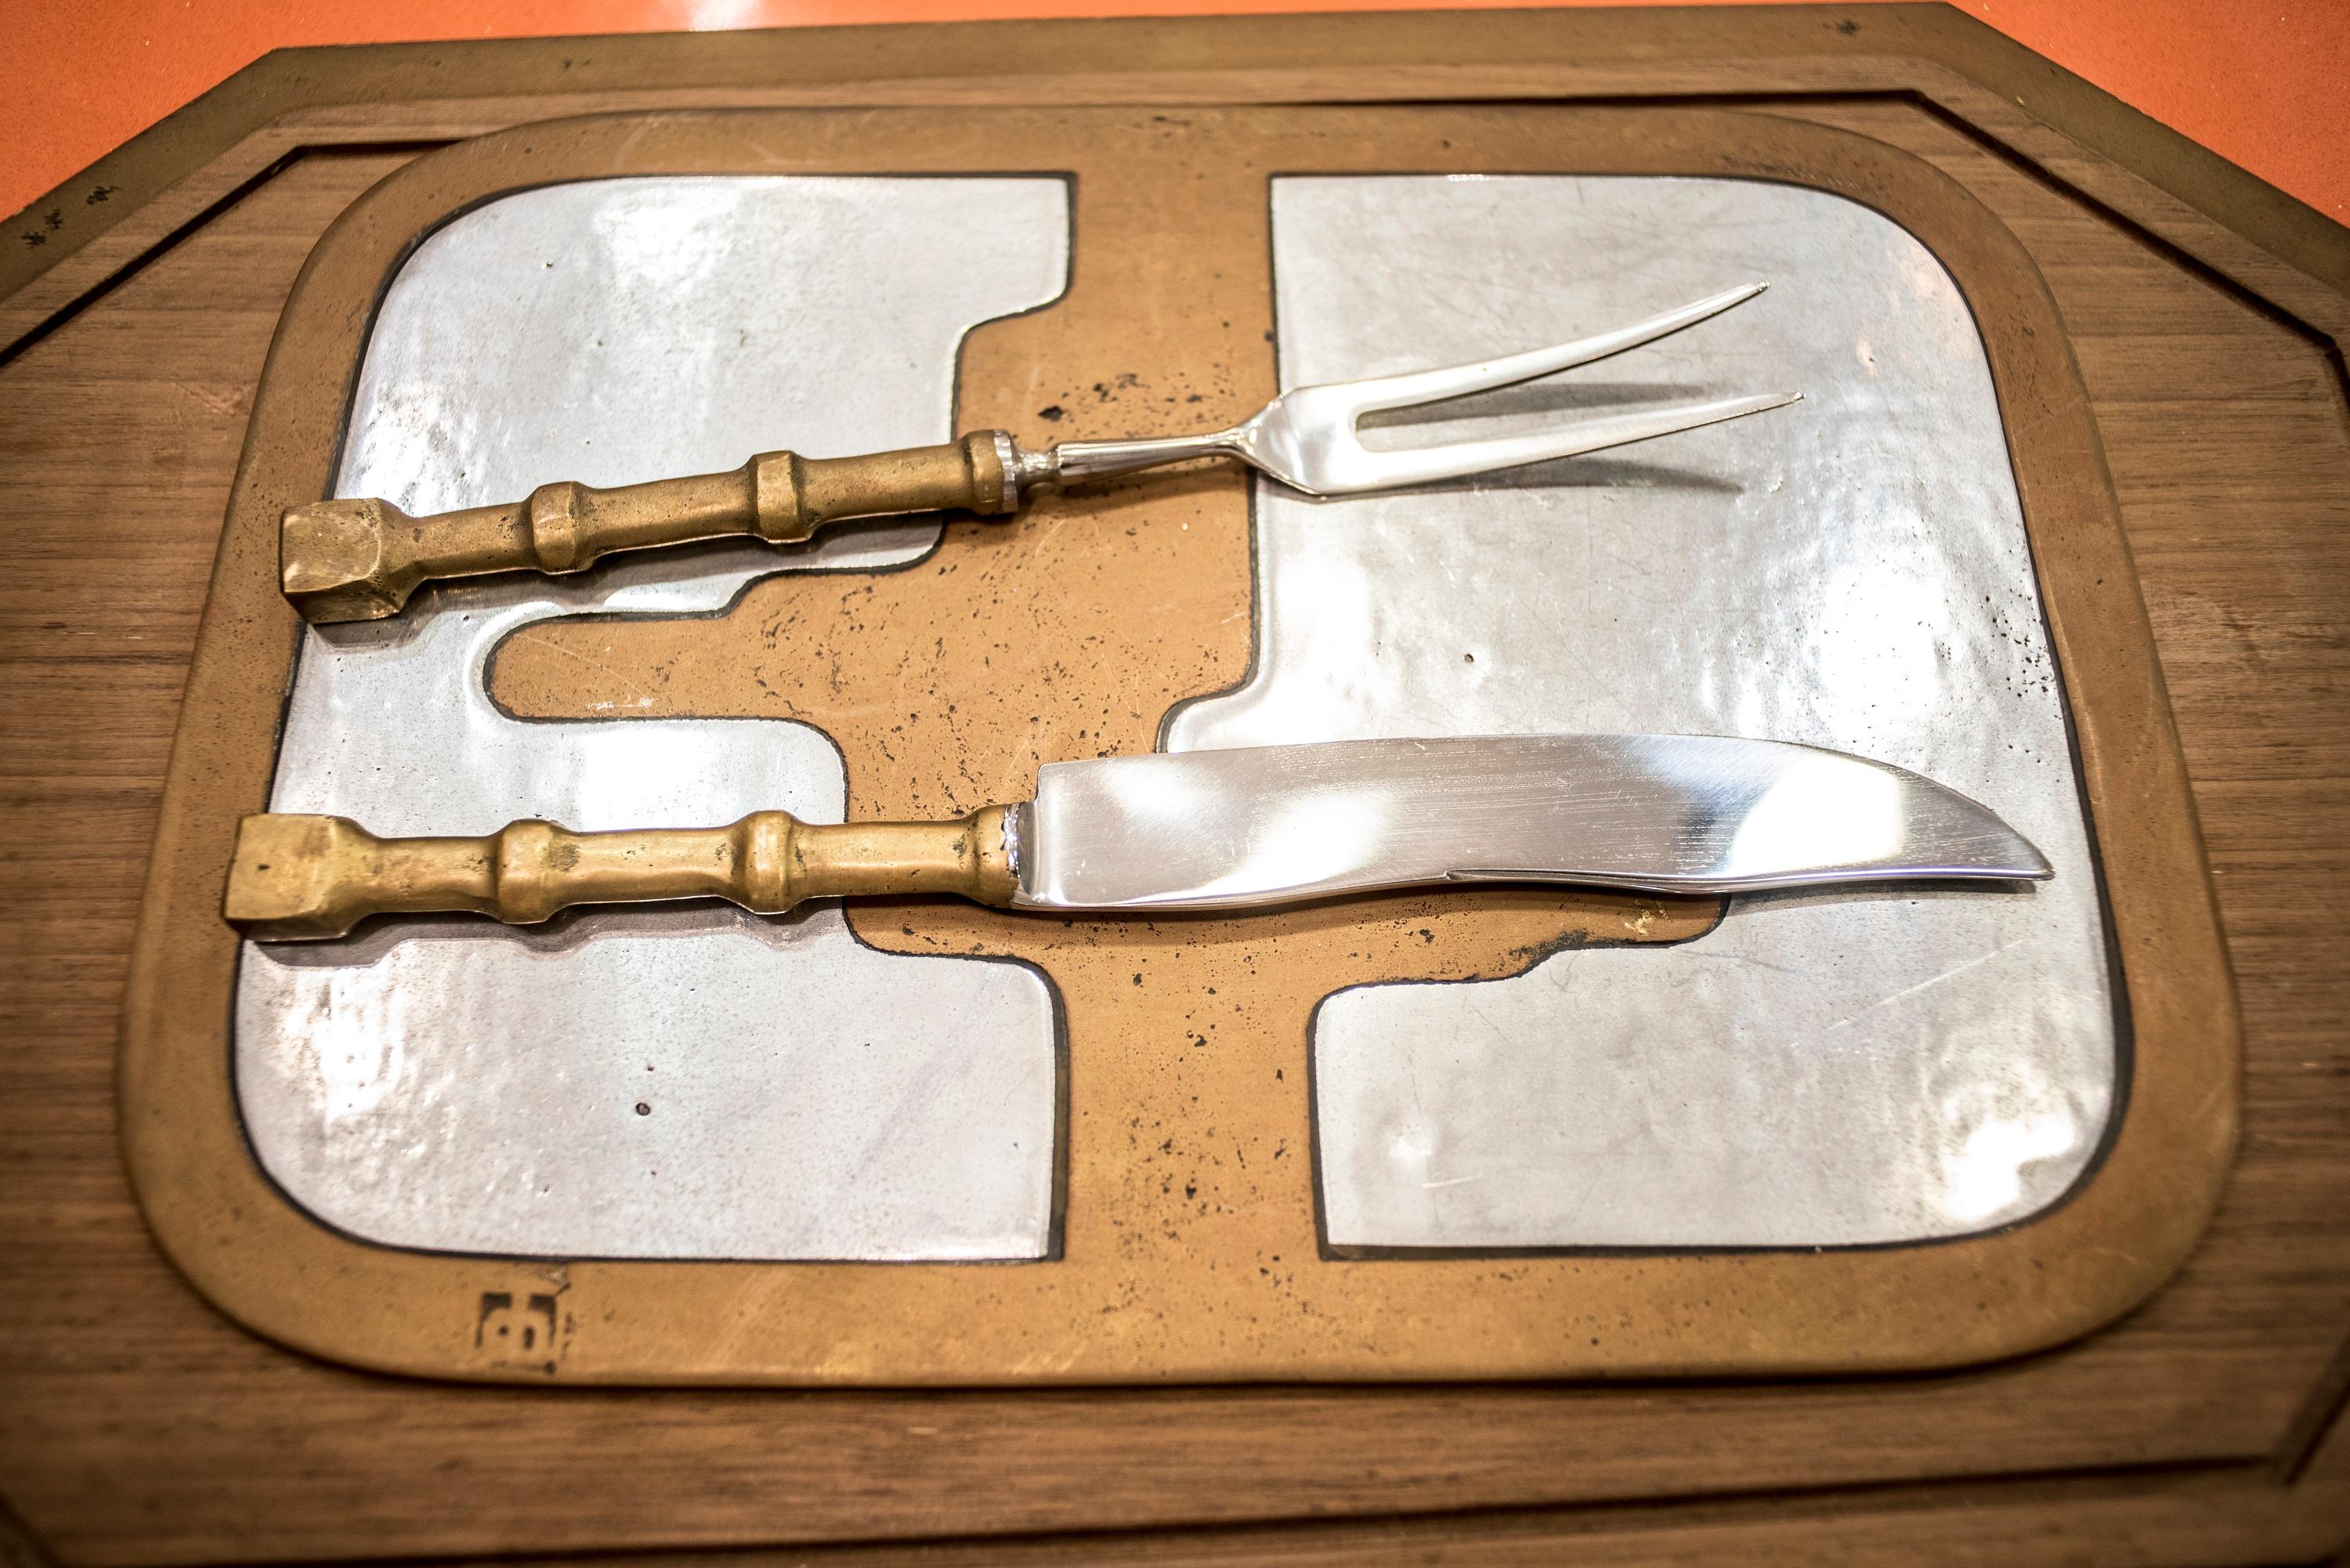 Awesome David Marshall serving tray with fork and knife, signed. Aluminum and brass melted to the sand like traditional casting systems. Wood on the top.
David Marshall (Marbella (Malaga) 1965) is an international well-known sculptor and